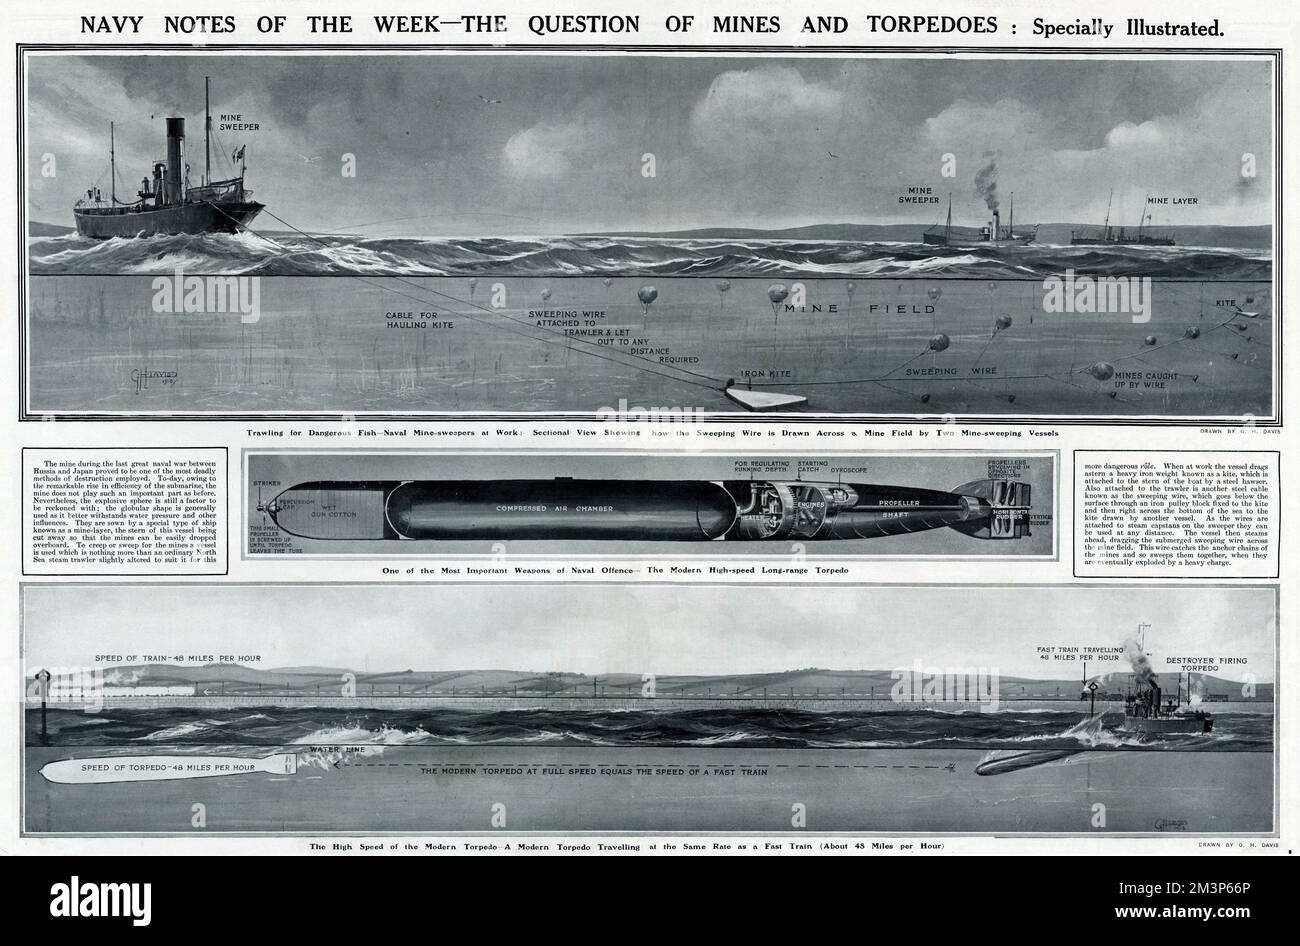 Navy Notes of the Week: the question of mines and torpedoes.  Showing naval minesweepers at work, sweeping a wire across an underwater mine field; a modern high-speed long-range torpedo; and a modern torpedo travelling at the same speed as a fast train (about 48 mph). Stock Photo